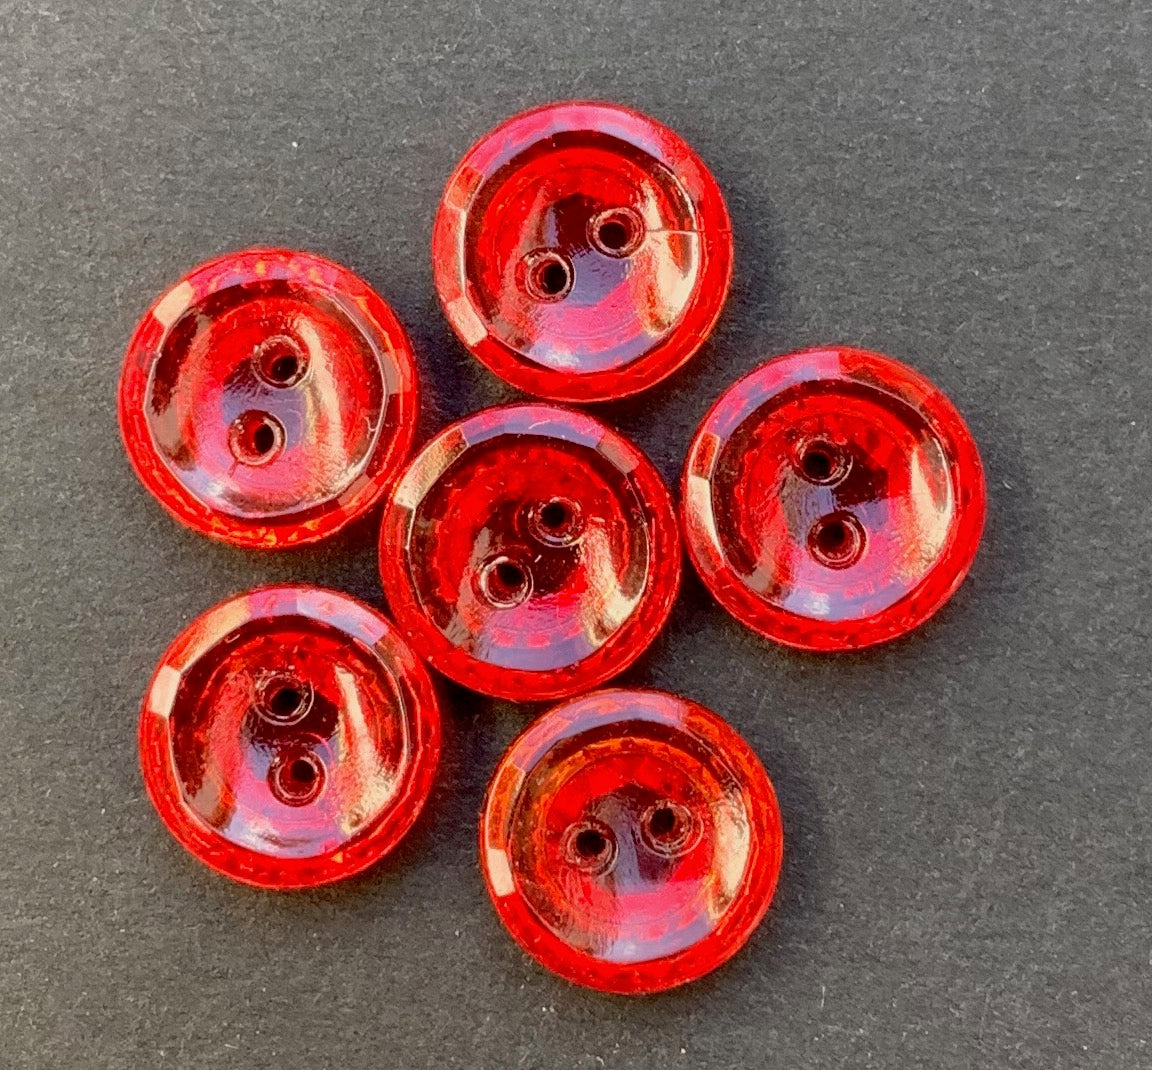 6 Glowing Red Vintage Faceted Glass 11mm or 1.3cm Buttons.